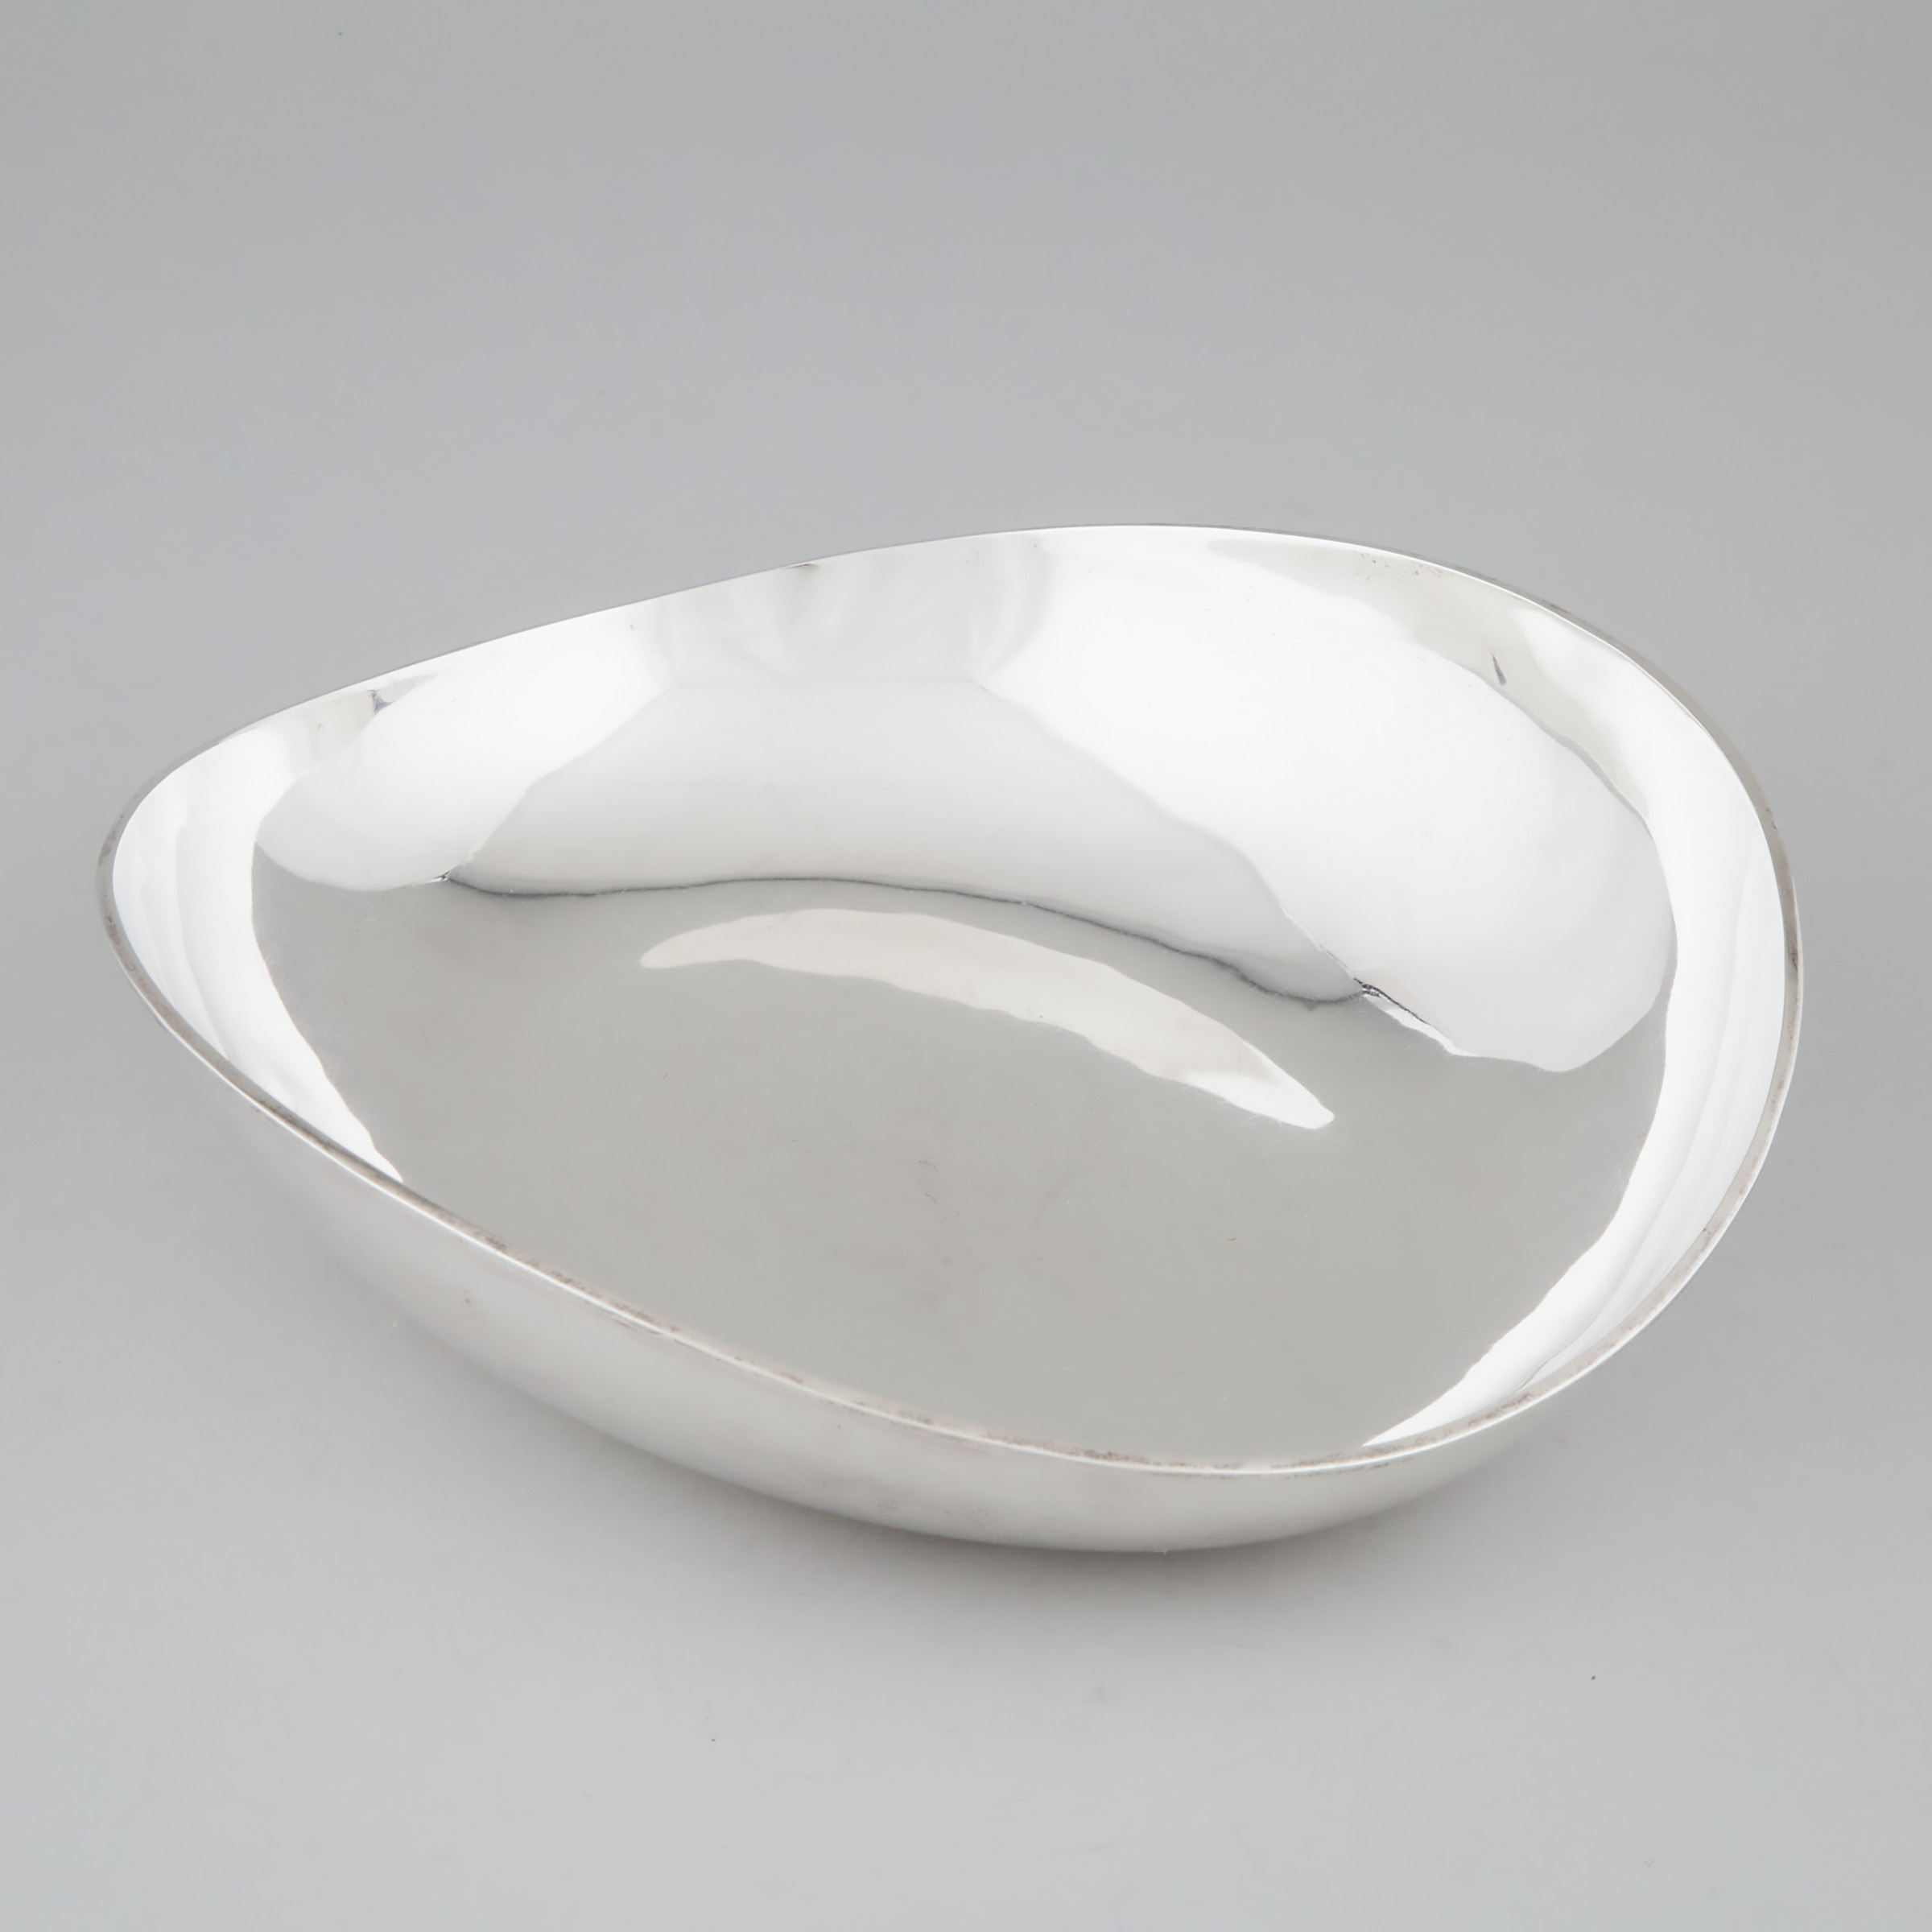 Mexican Silver Elliptical Shaped Dish, 20th century 